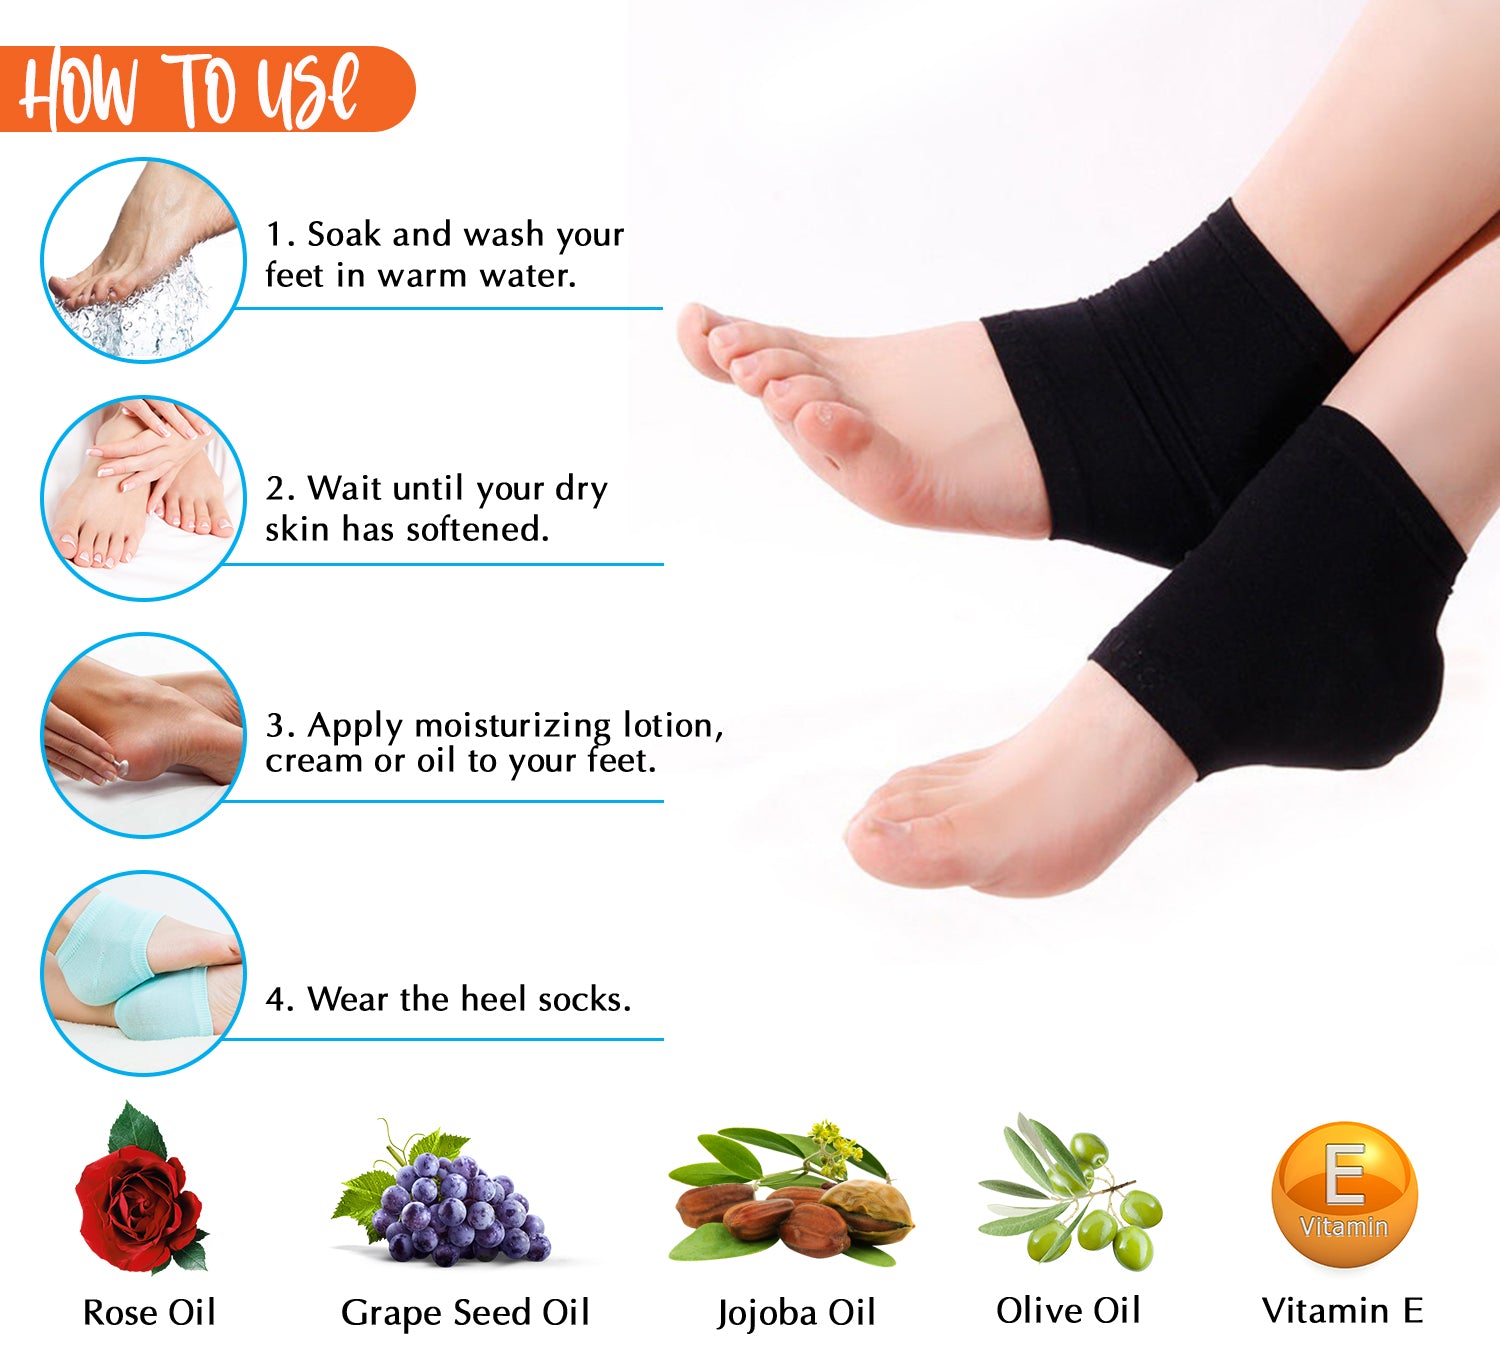 Moisturizing Heel Gel Socks - Heal Dry Cracked Dead Skin Foot Care Softener  Pedicure Spa Sock Set | 4 Pairs Soft Silicone Lotion Ankle Sleeves to  Repair Eczema Callus Rough Pain Relief